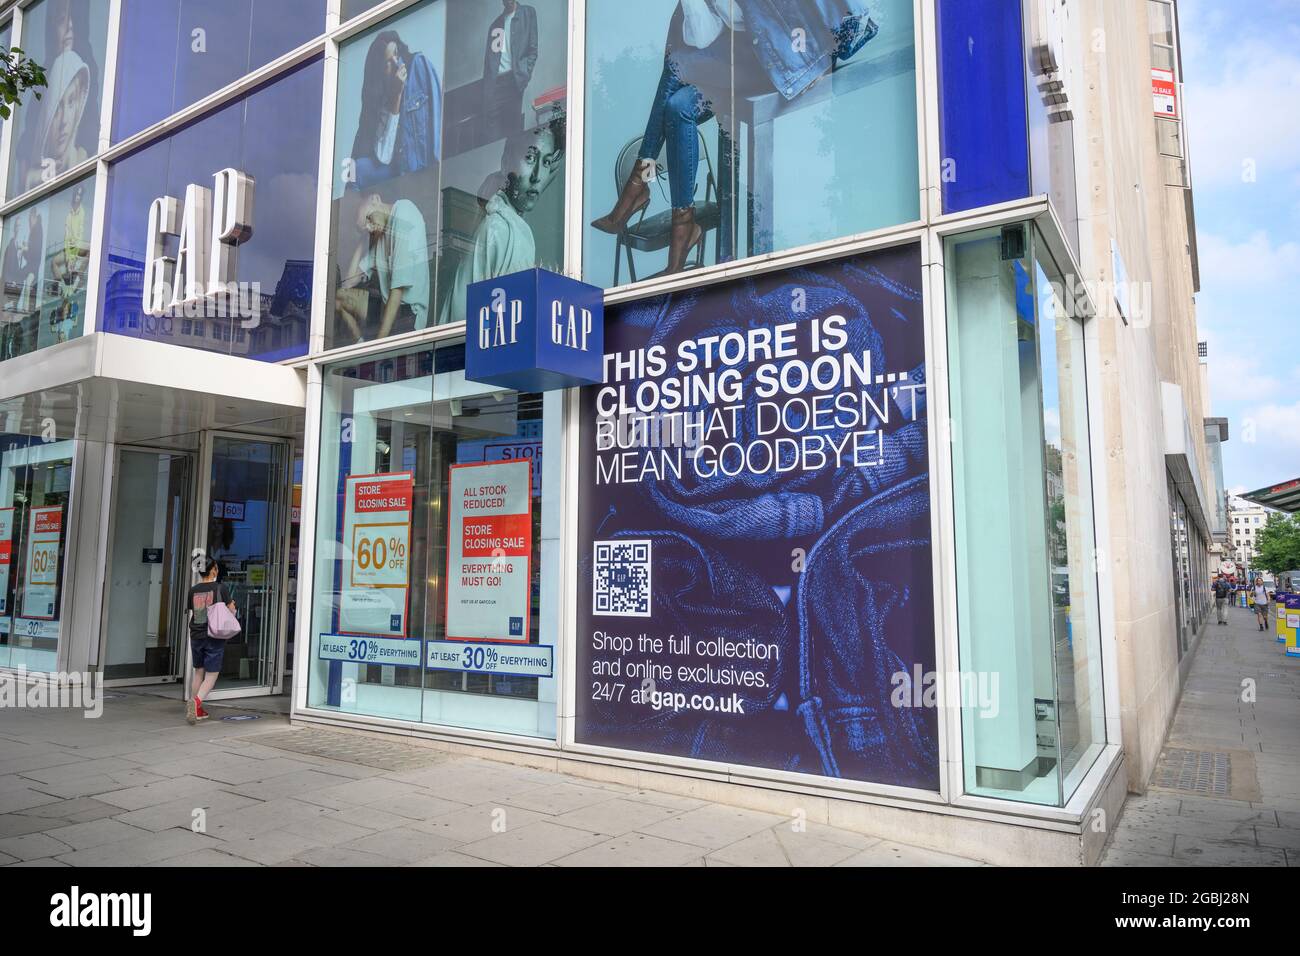 Oxford Street, London, UK. 4 August 2021. Sale at GAP store in Oxford Street.  Gap is due to close all UK stores and move business online Stock Photo -  Alamy